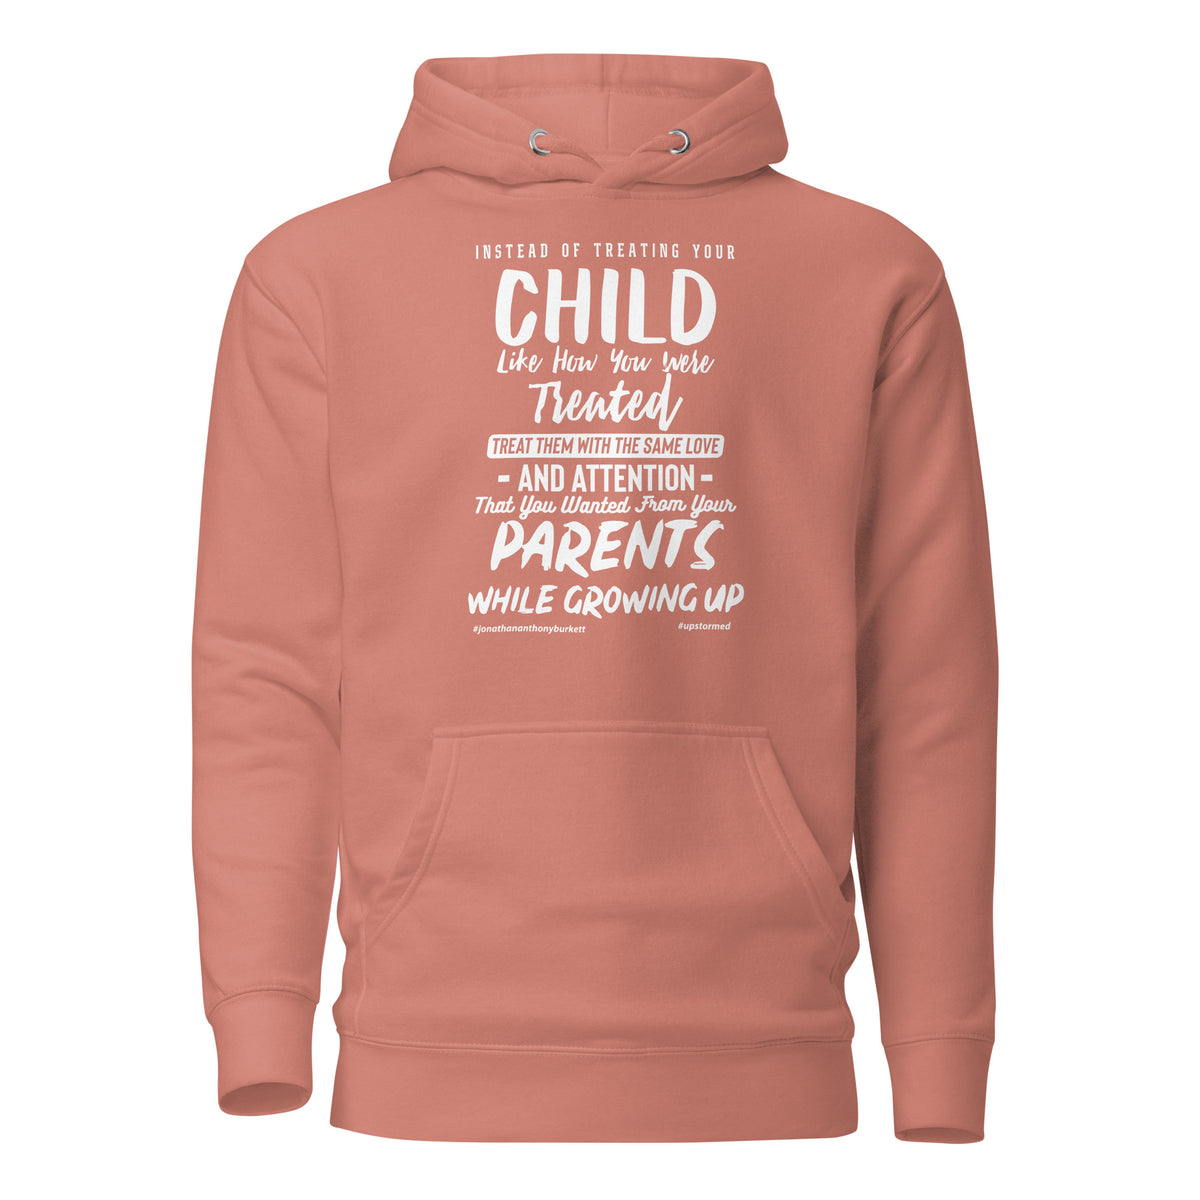 Treating Your Child Upstormed Hoodie